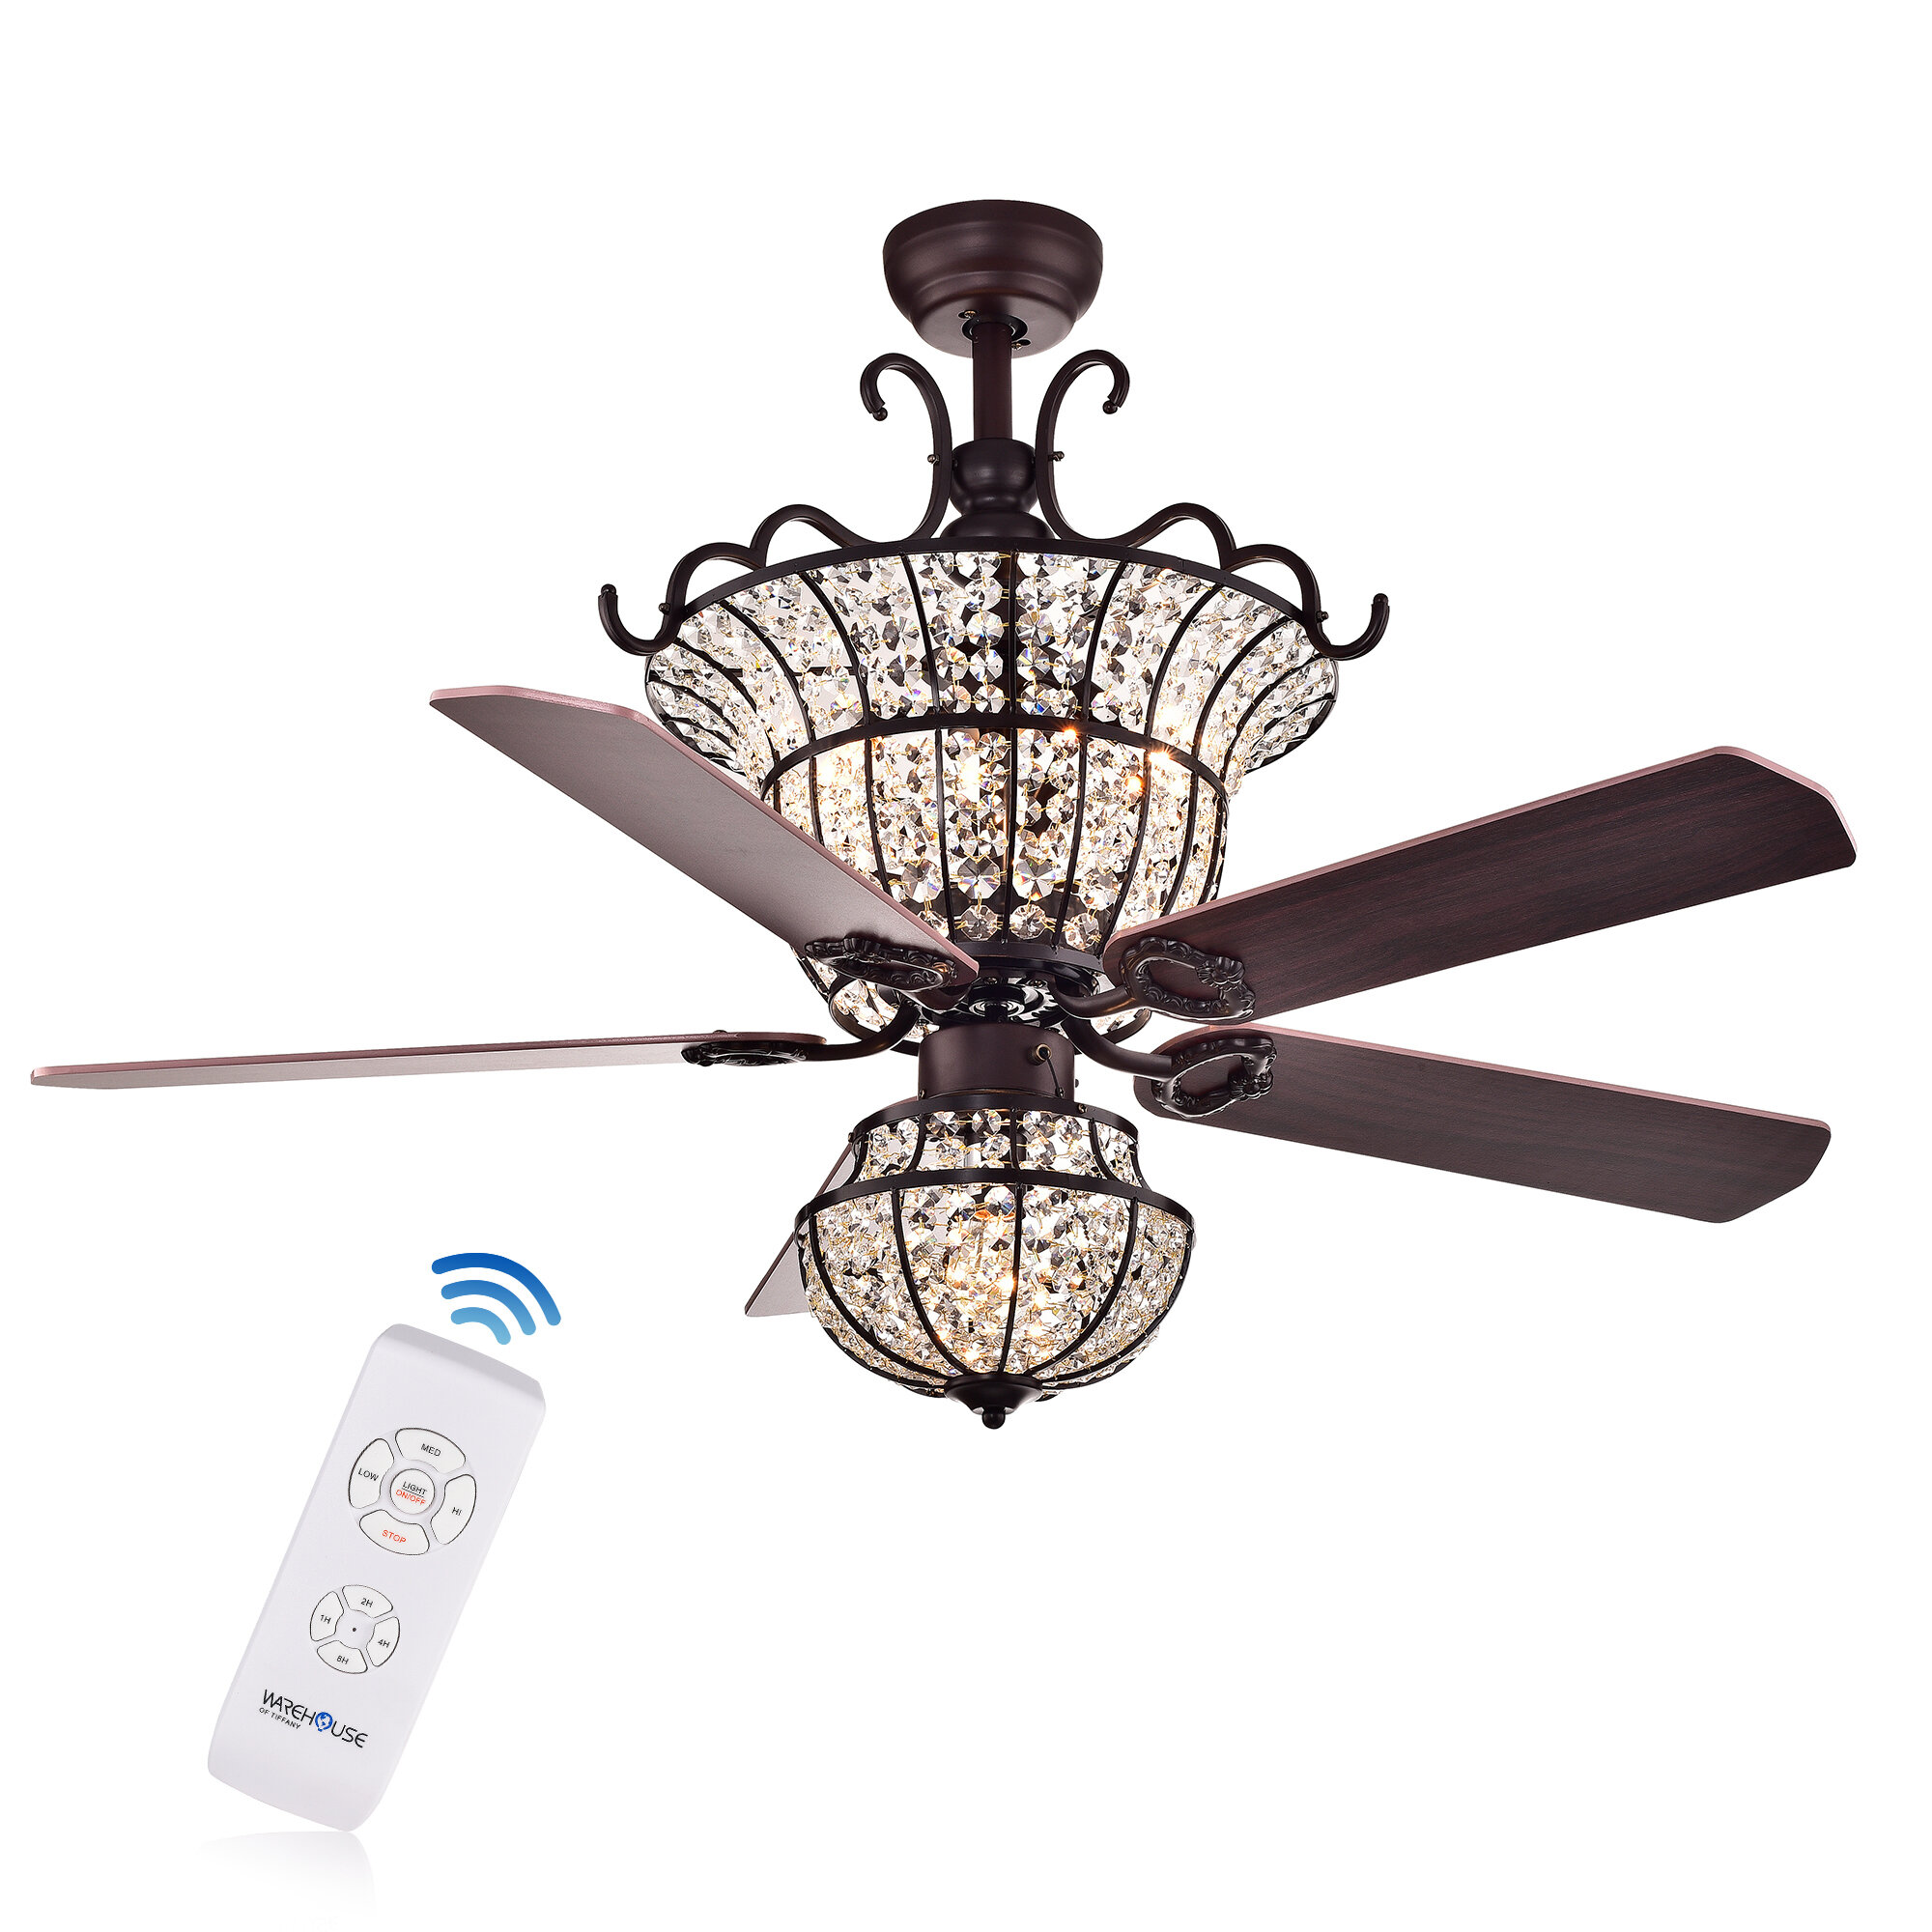 Astoria Grand 52 Drumcullen 5 Blade Ceiling Fan With Remote